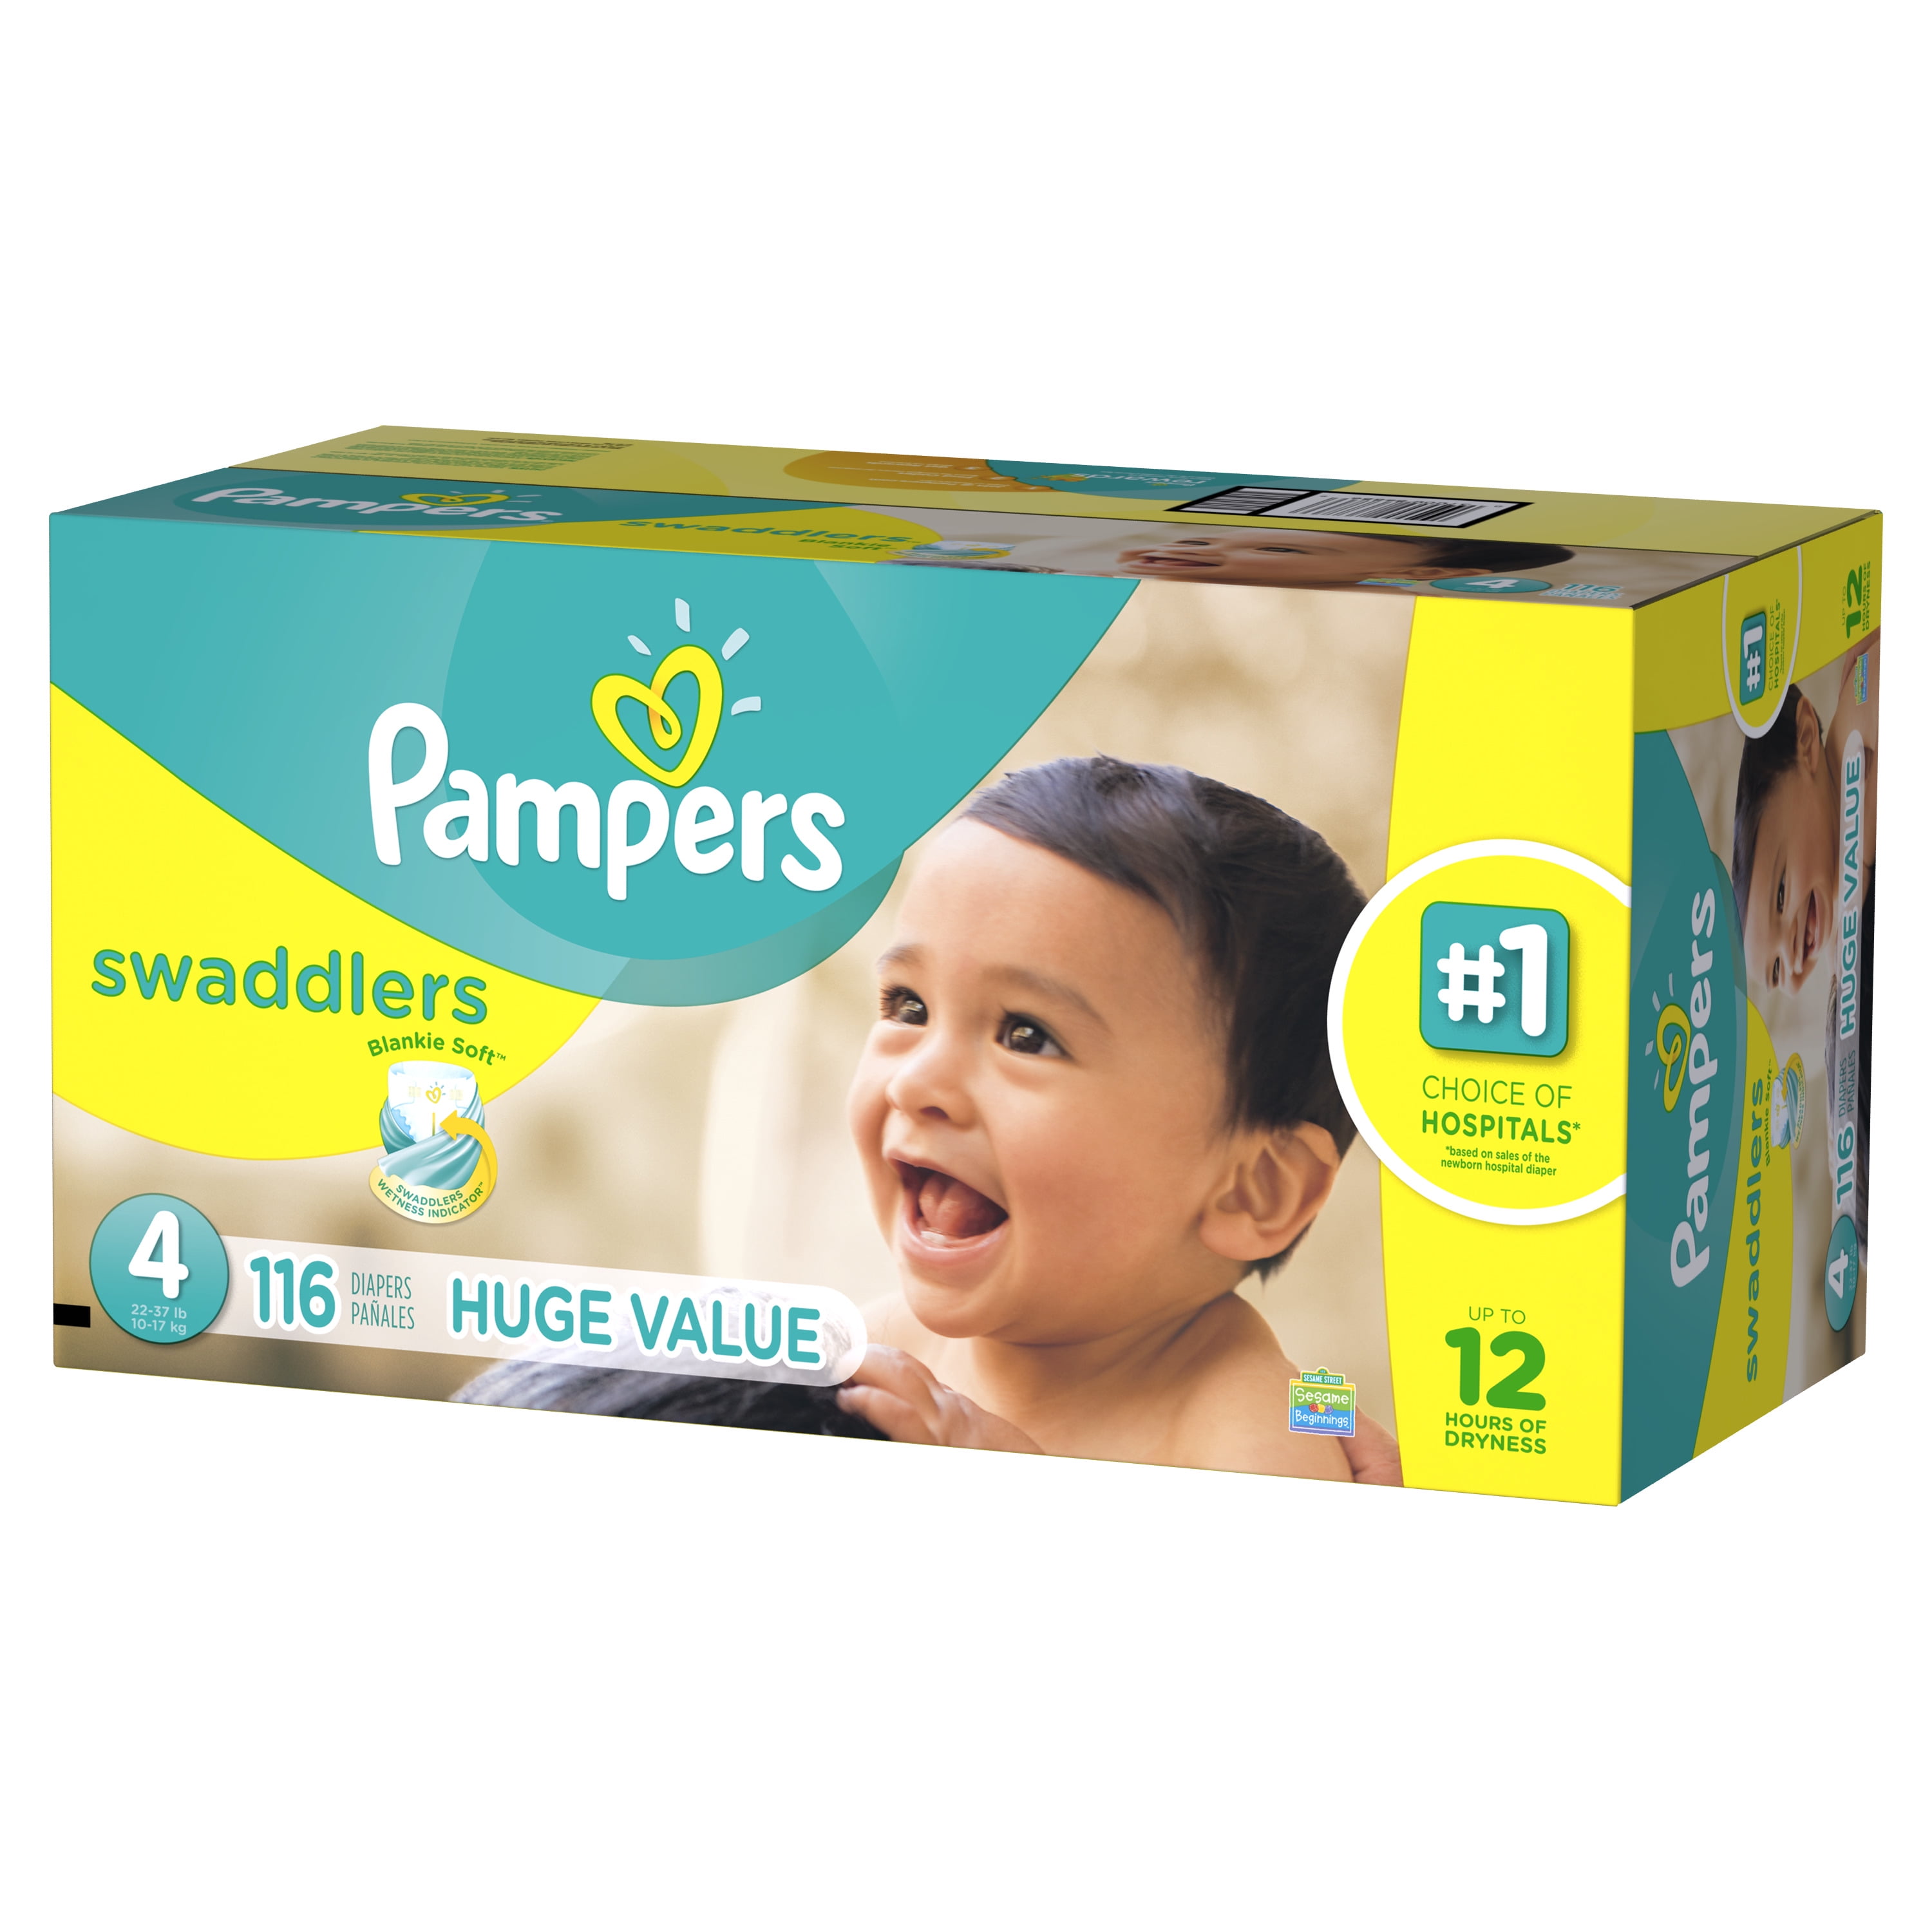 Pampers Swaddlers Diapers Size 4 116 count - Walmart.com - Walmart.com